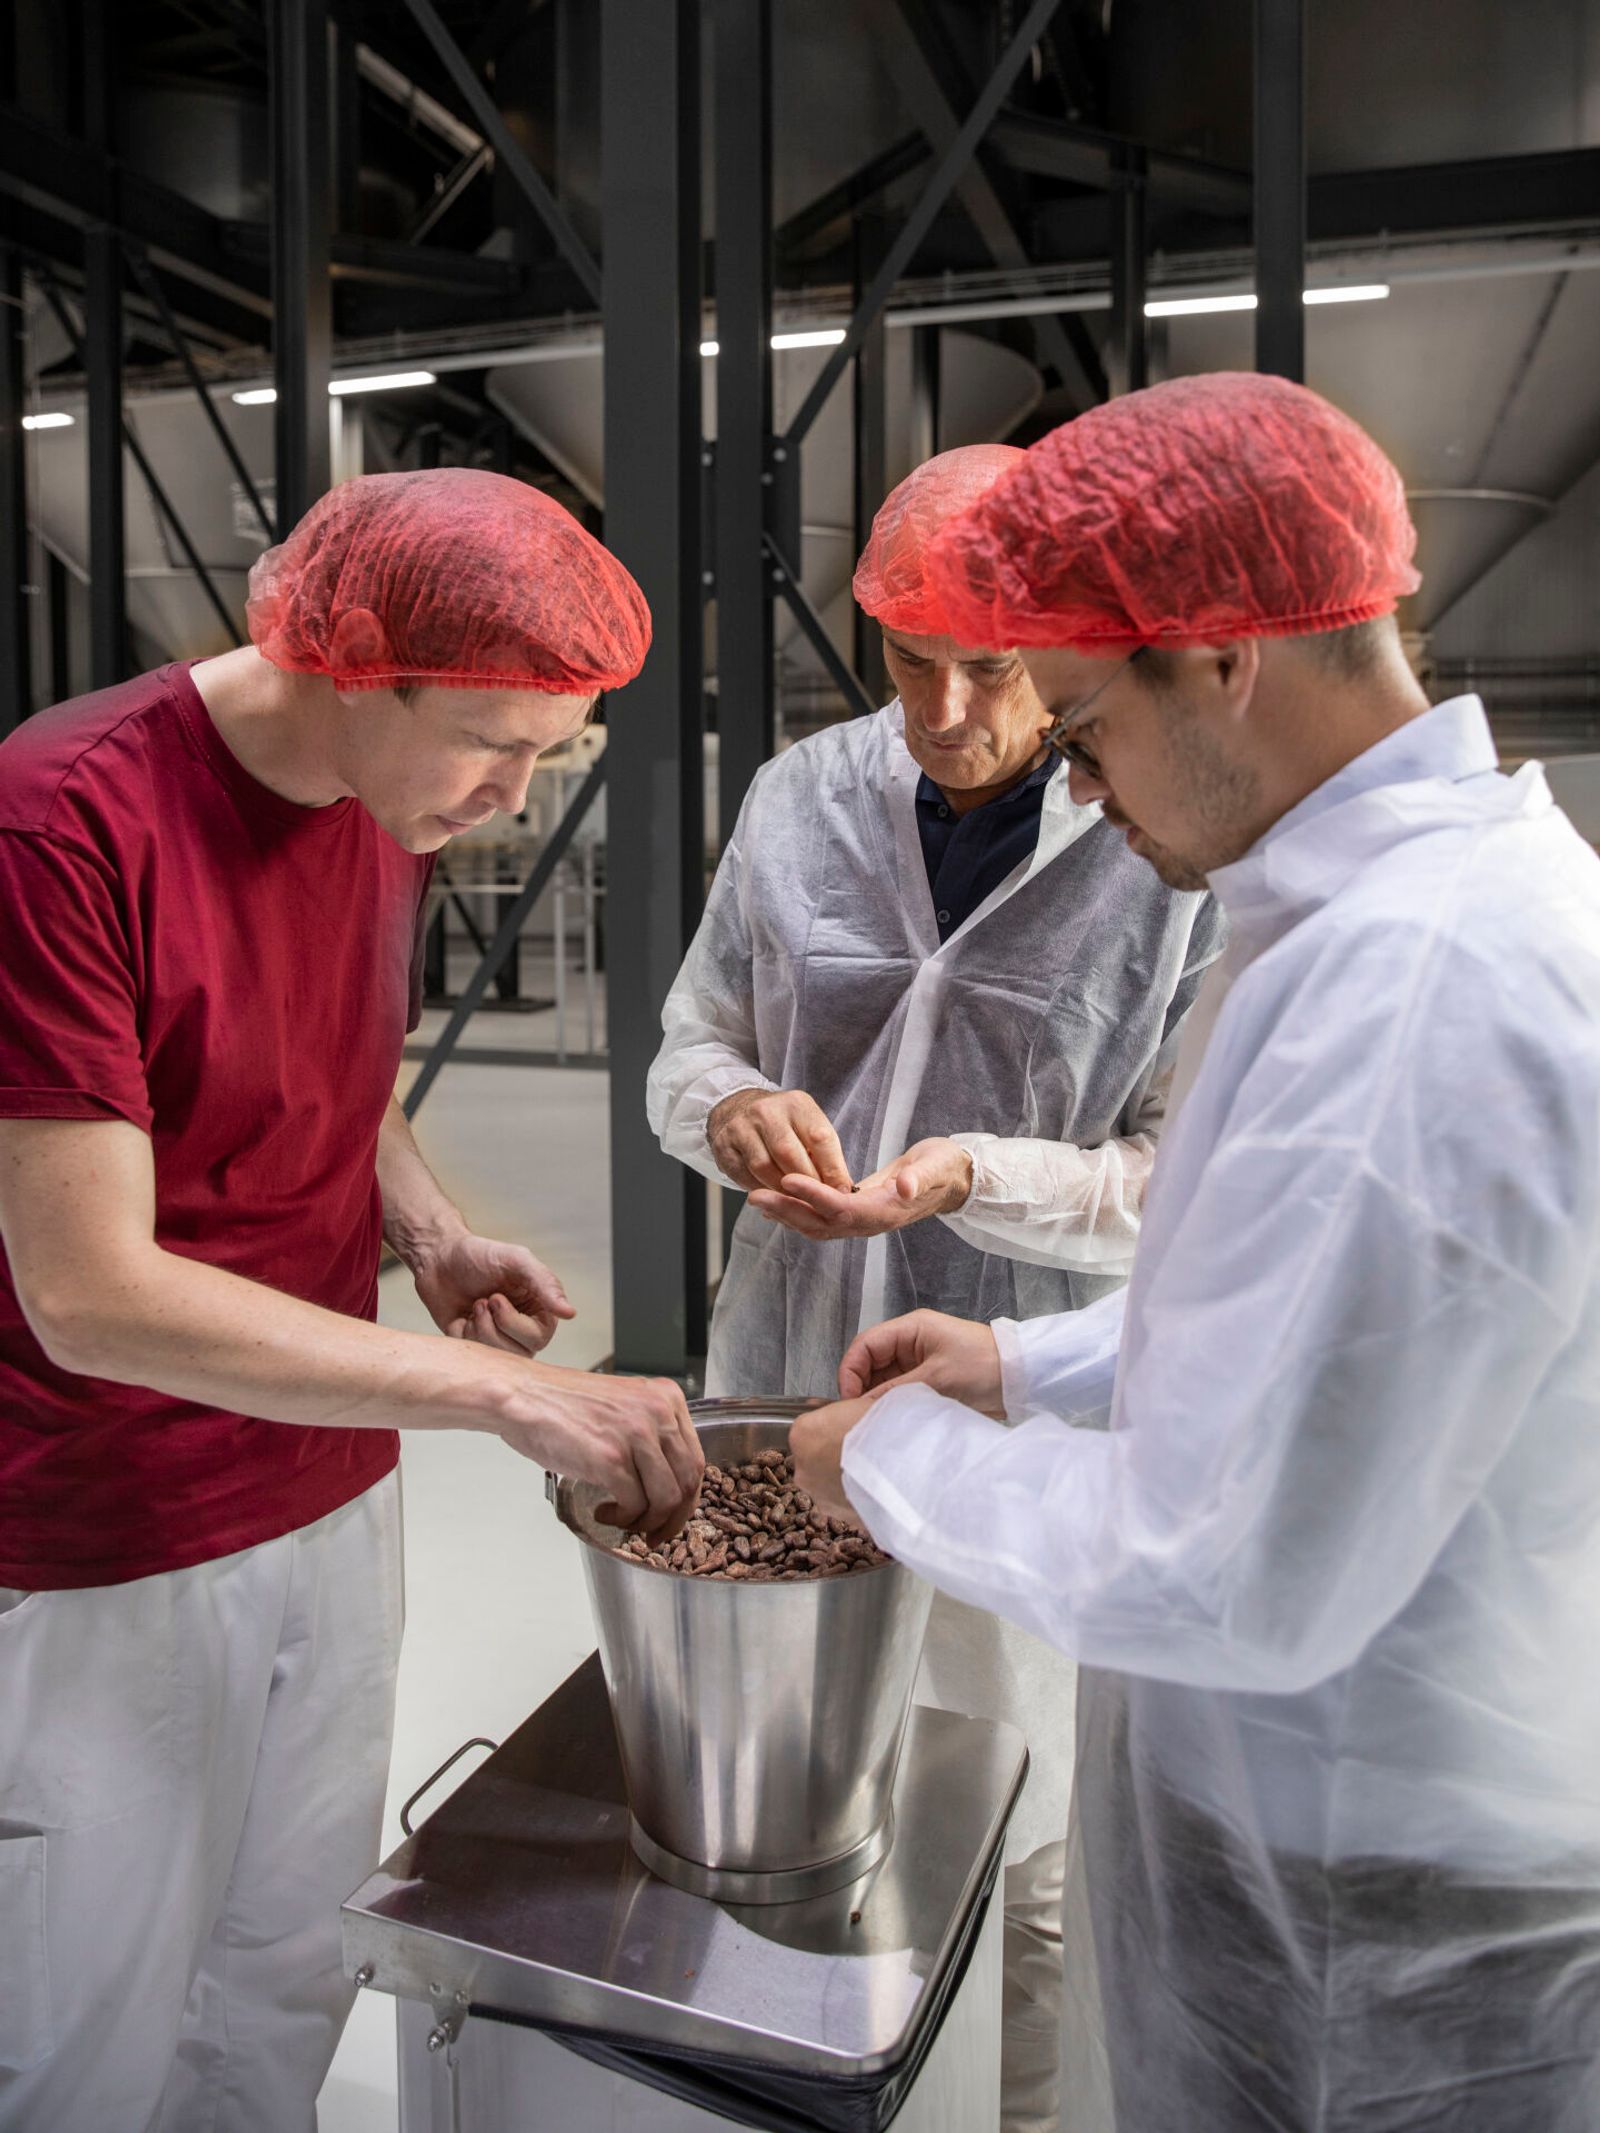 From left: Yannick Rihs, David Yersin and Simon Yersin check the quality of the cocoa beans.